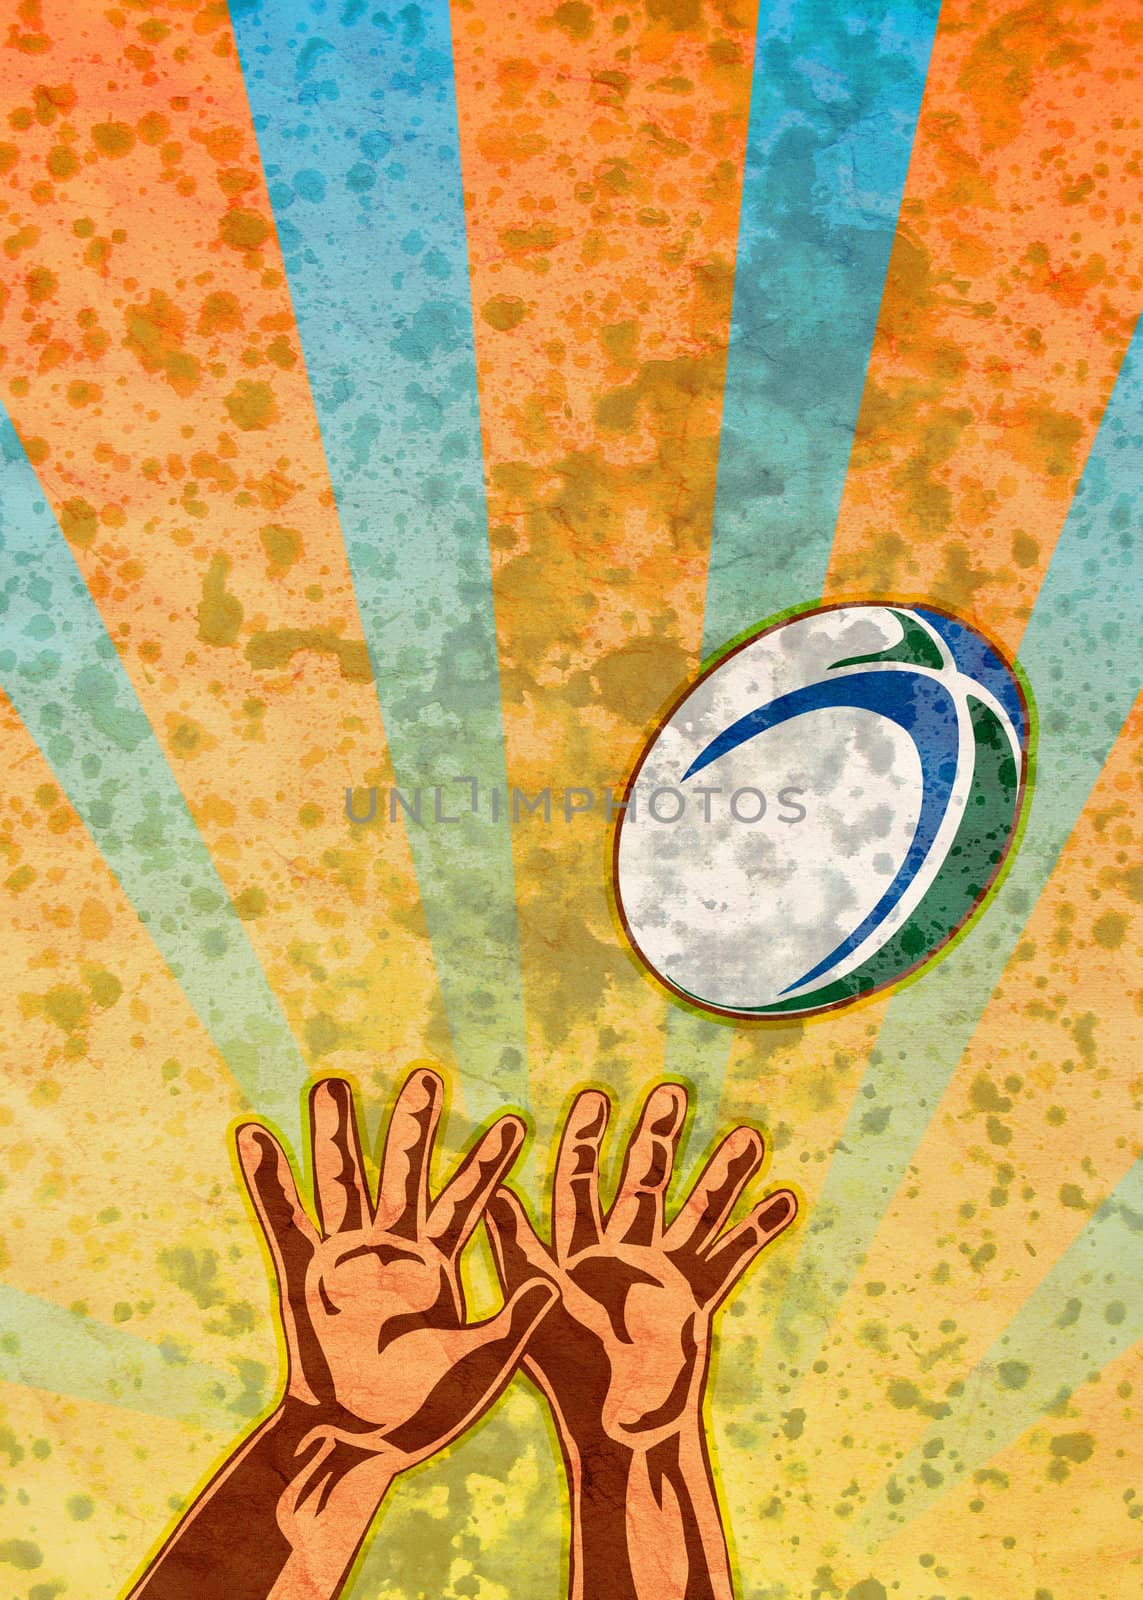 poster illustration of a rugby player hands catching ball with grunge texture sunburst background